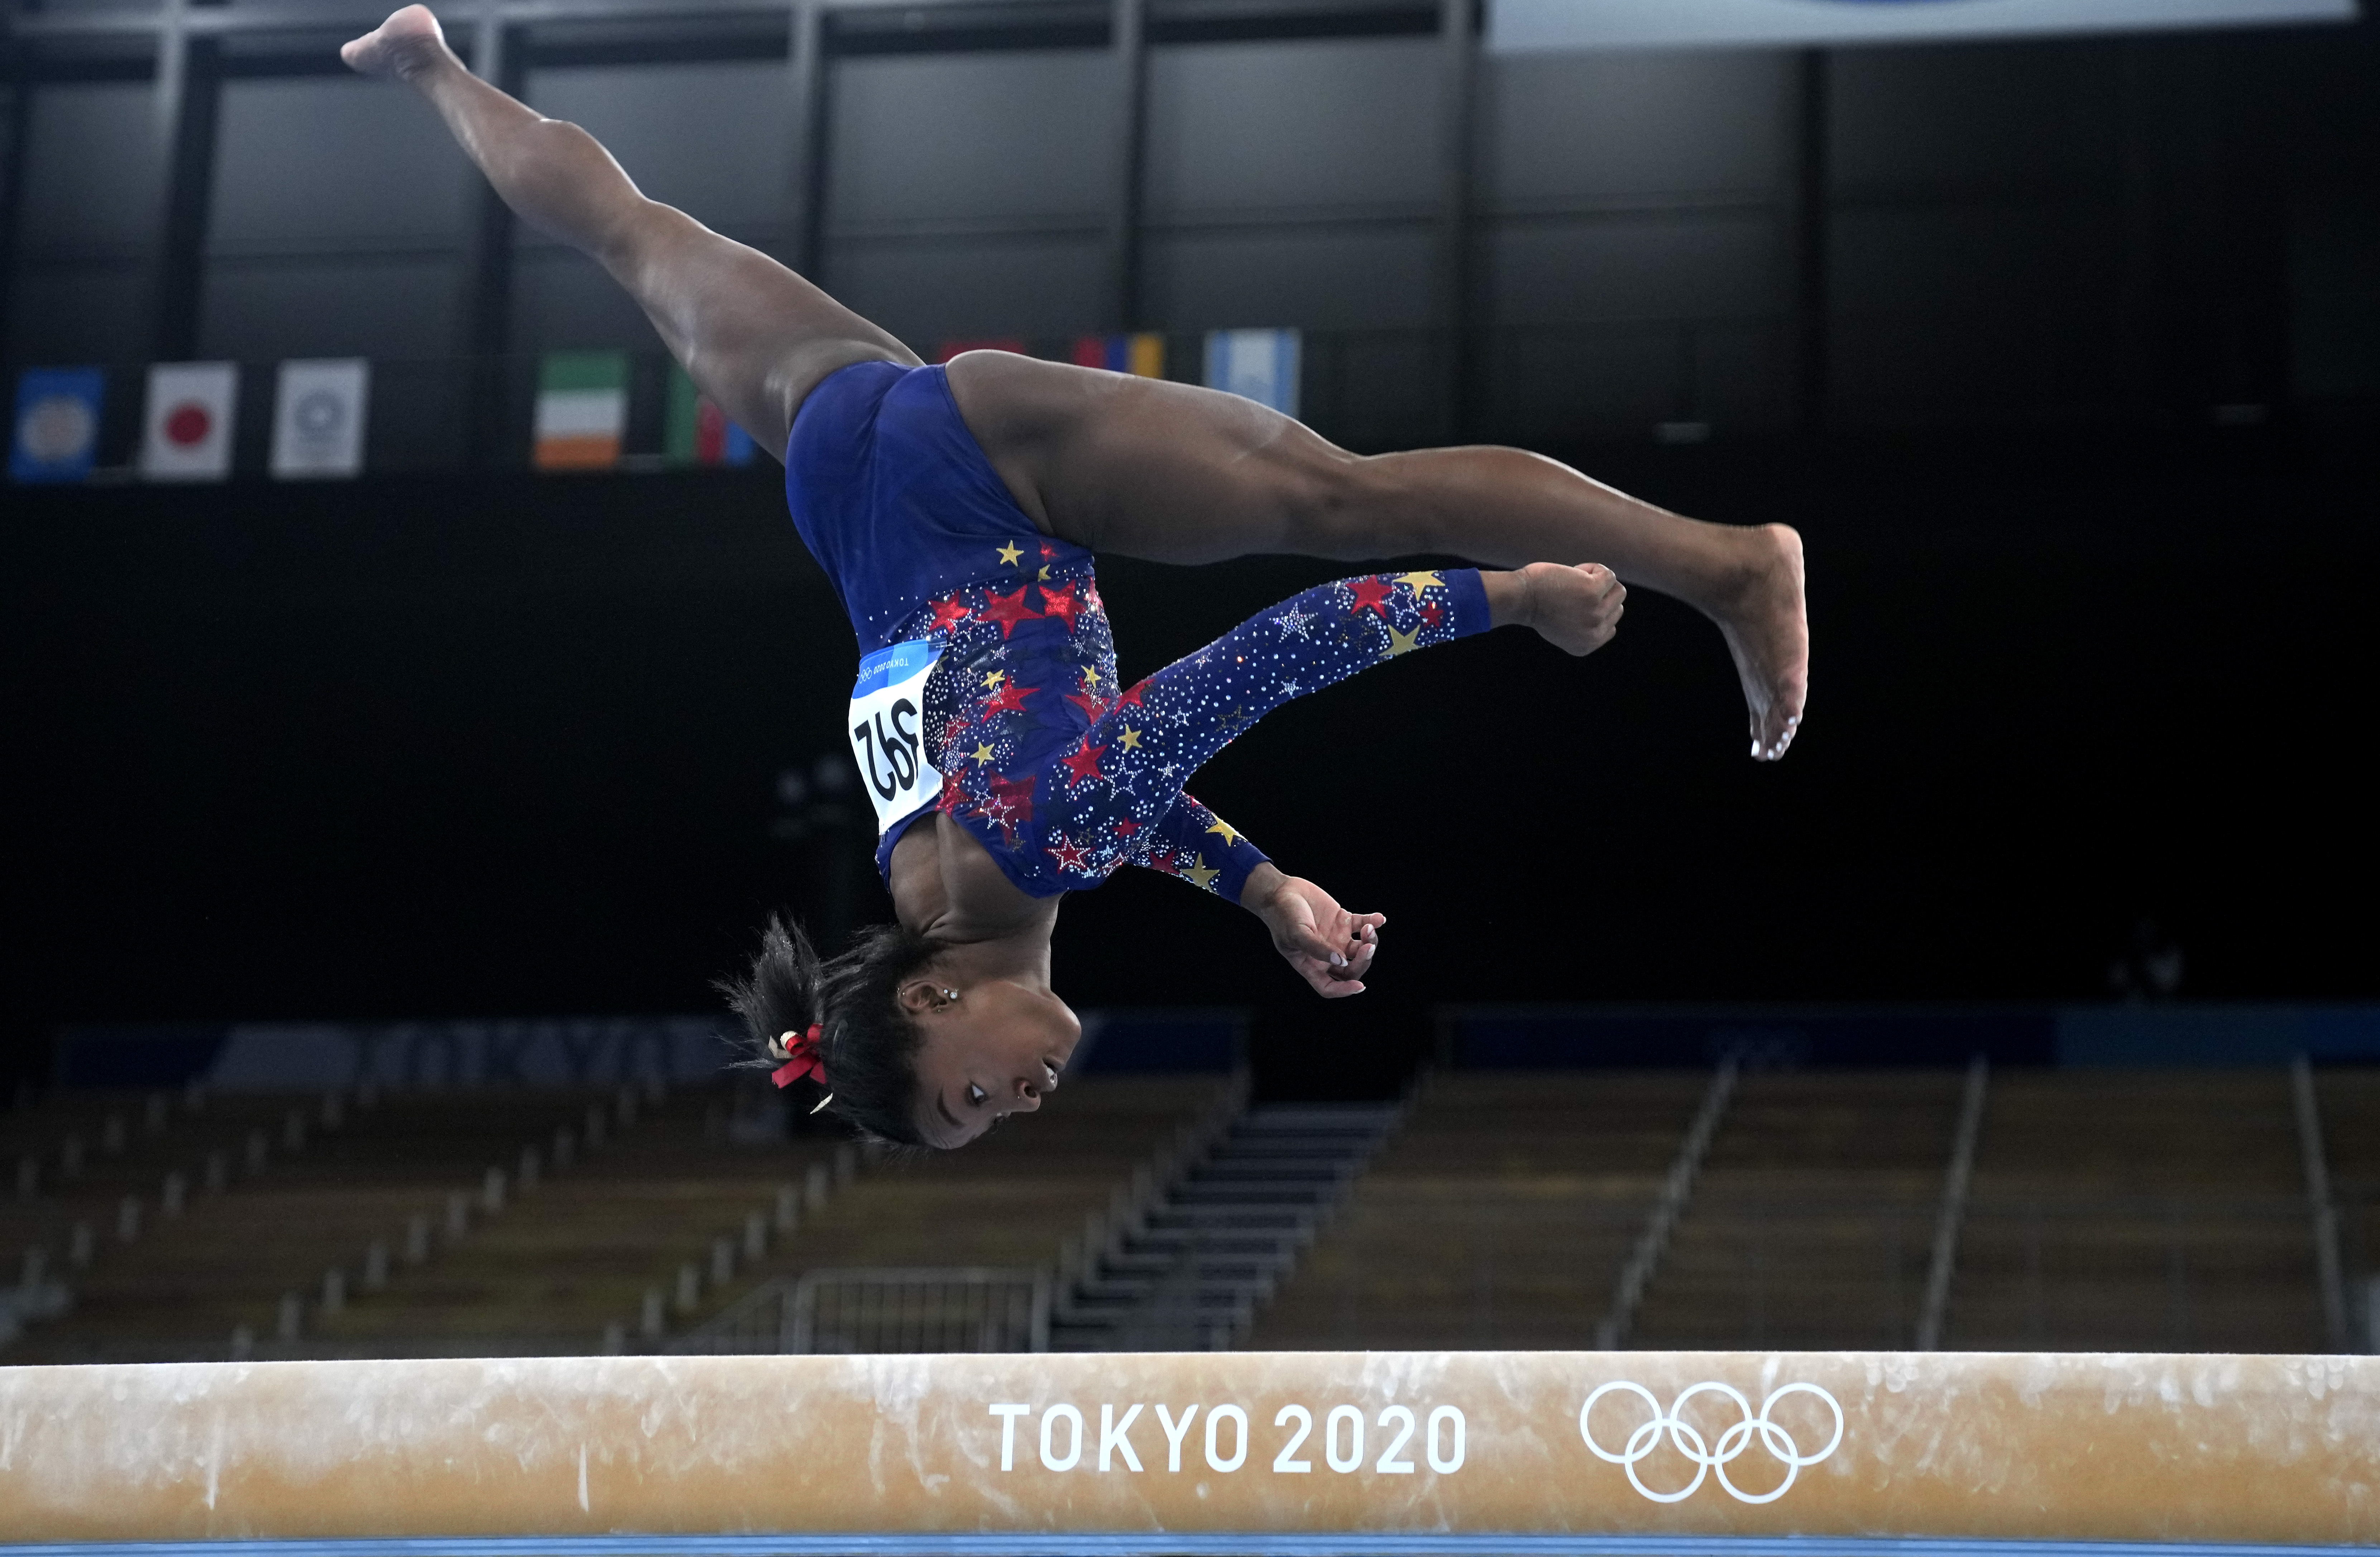 Nbc Tokyo Olympics 21 Simone Biles Gymnastics Schedule On Tv And Streaming For Tuesday July 27